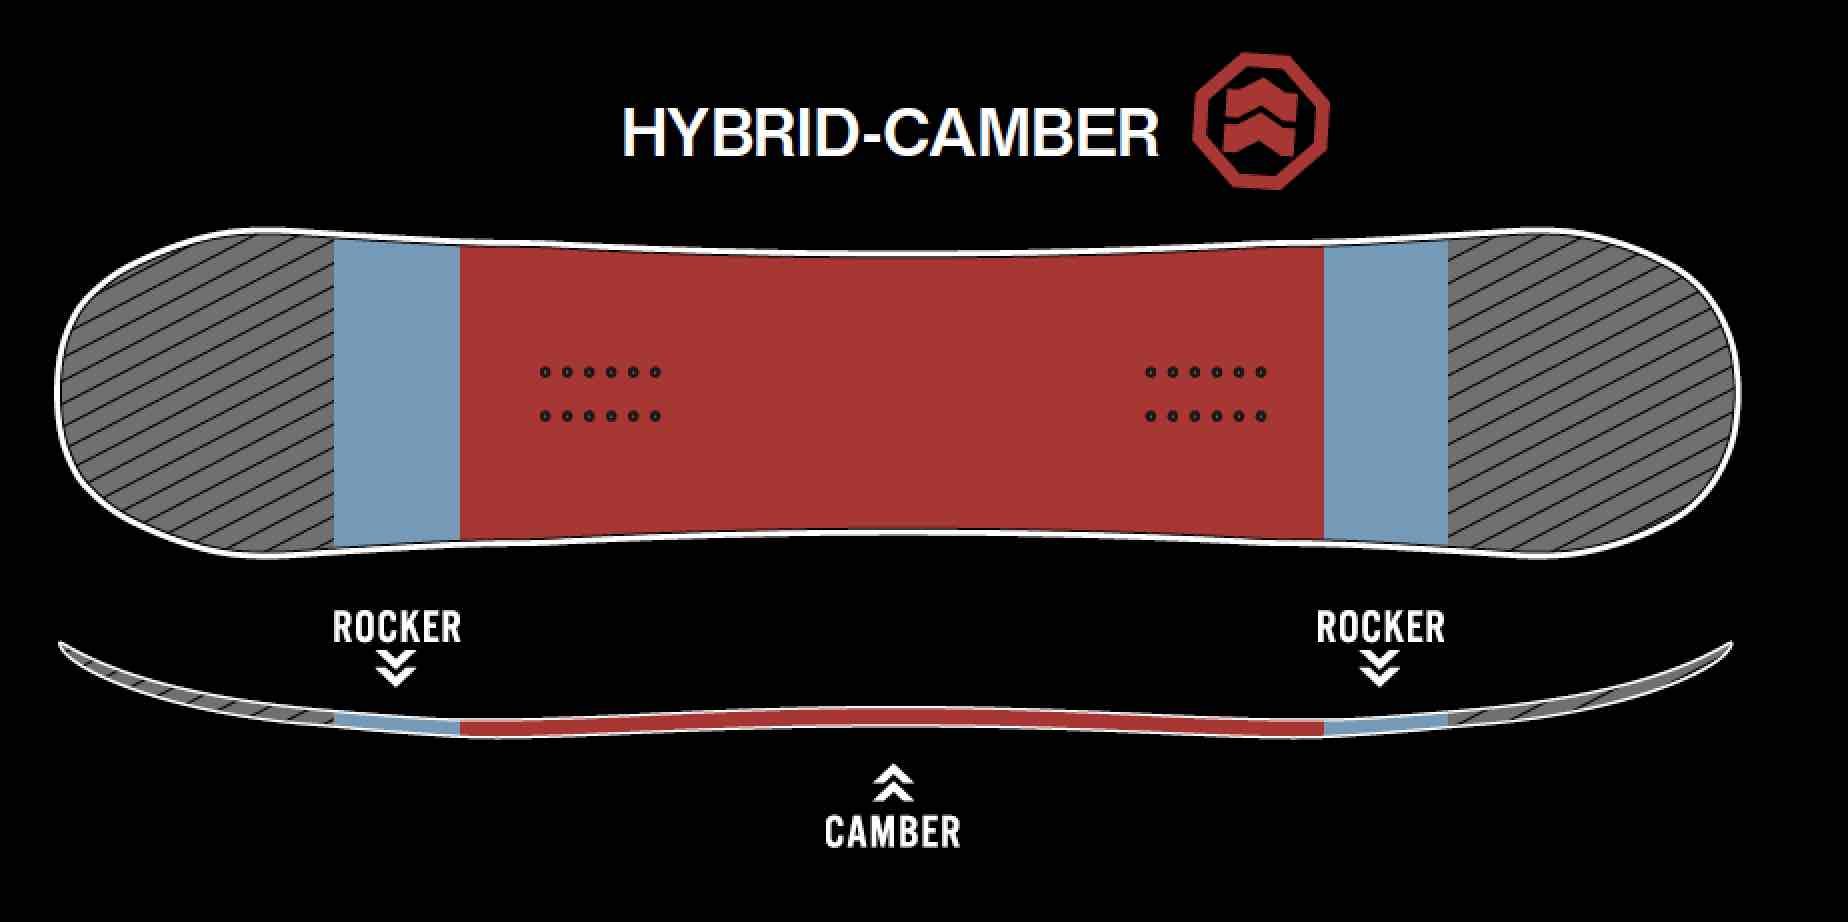 Let's understand the hybrid camber with illustrations.You can see where the camber is and where the locker is